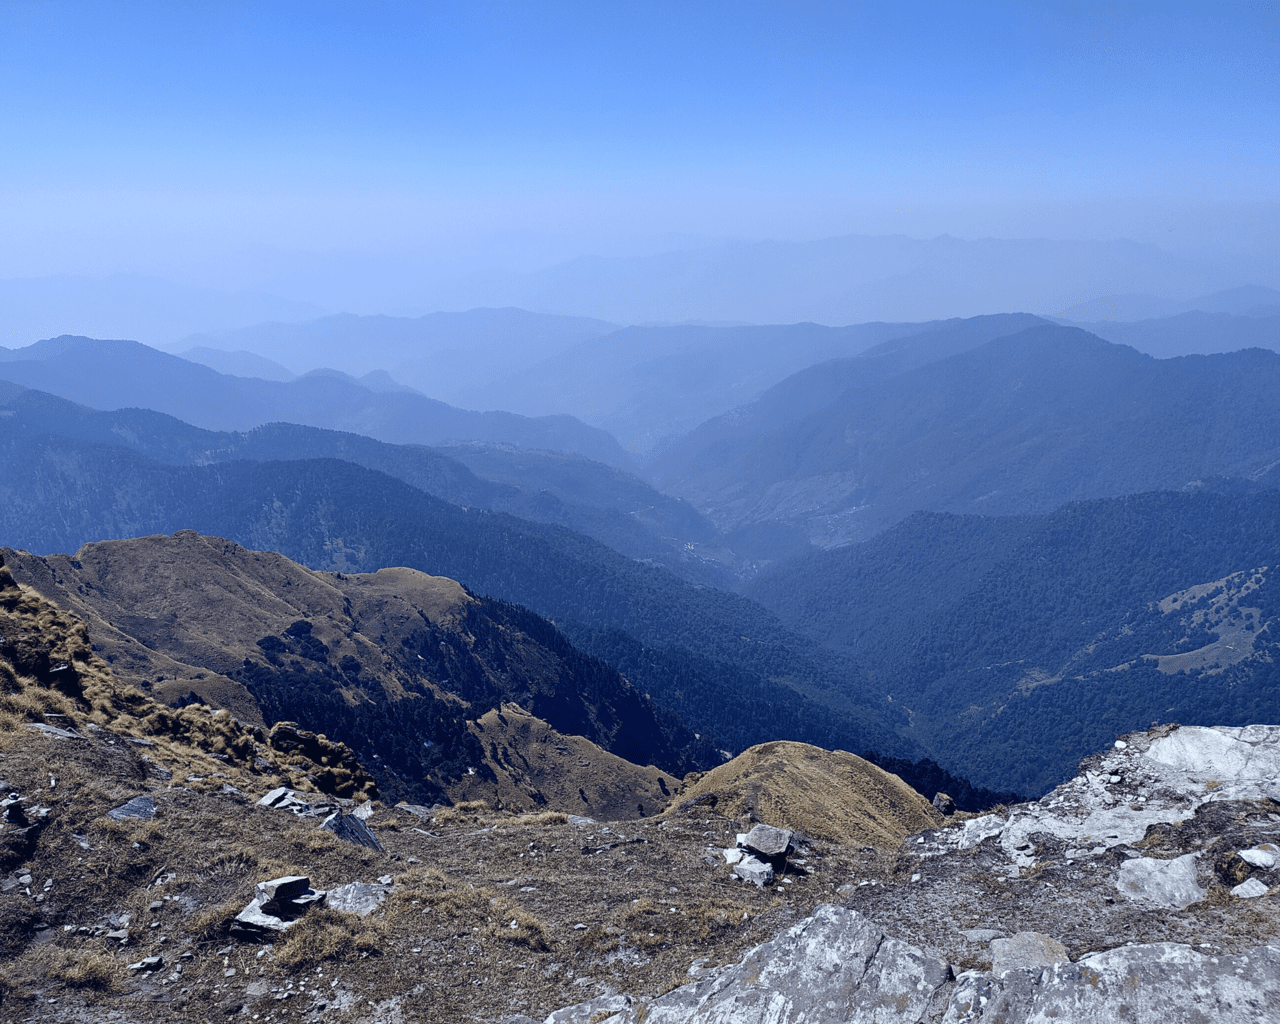 Can we explore Chopta in one day